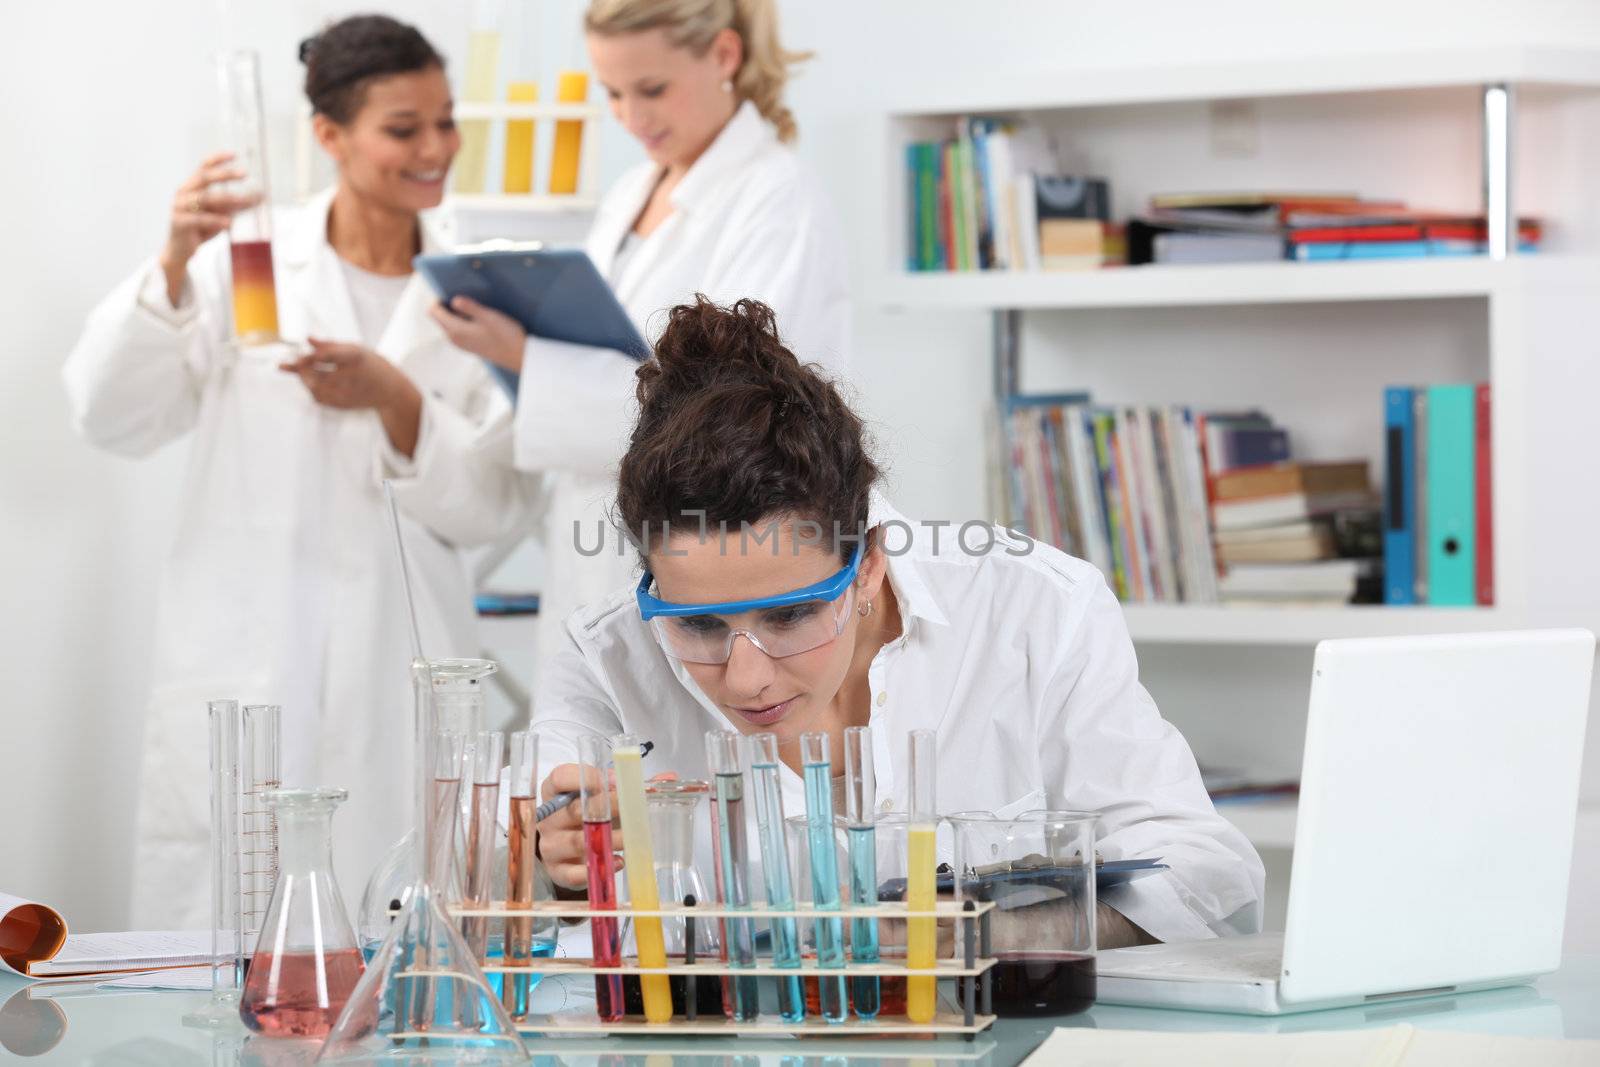 Laboratory workers by phovoir